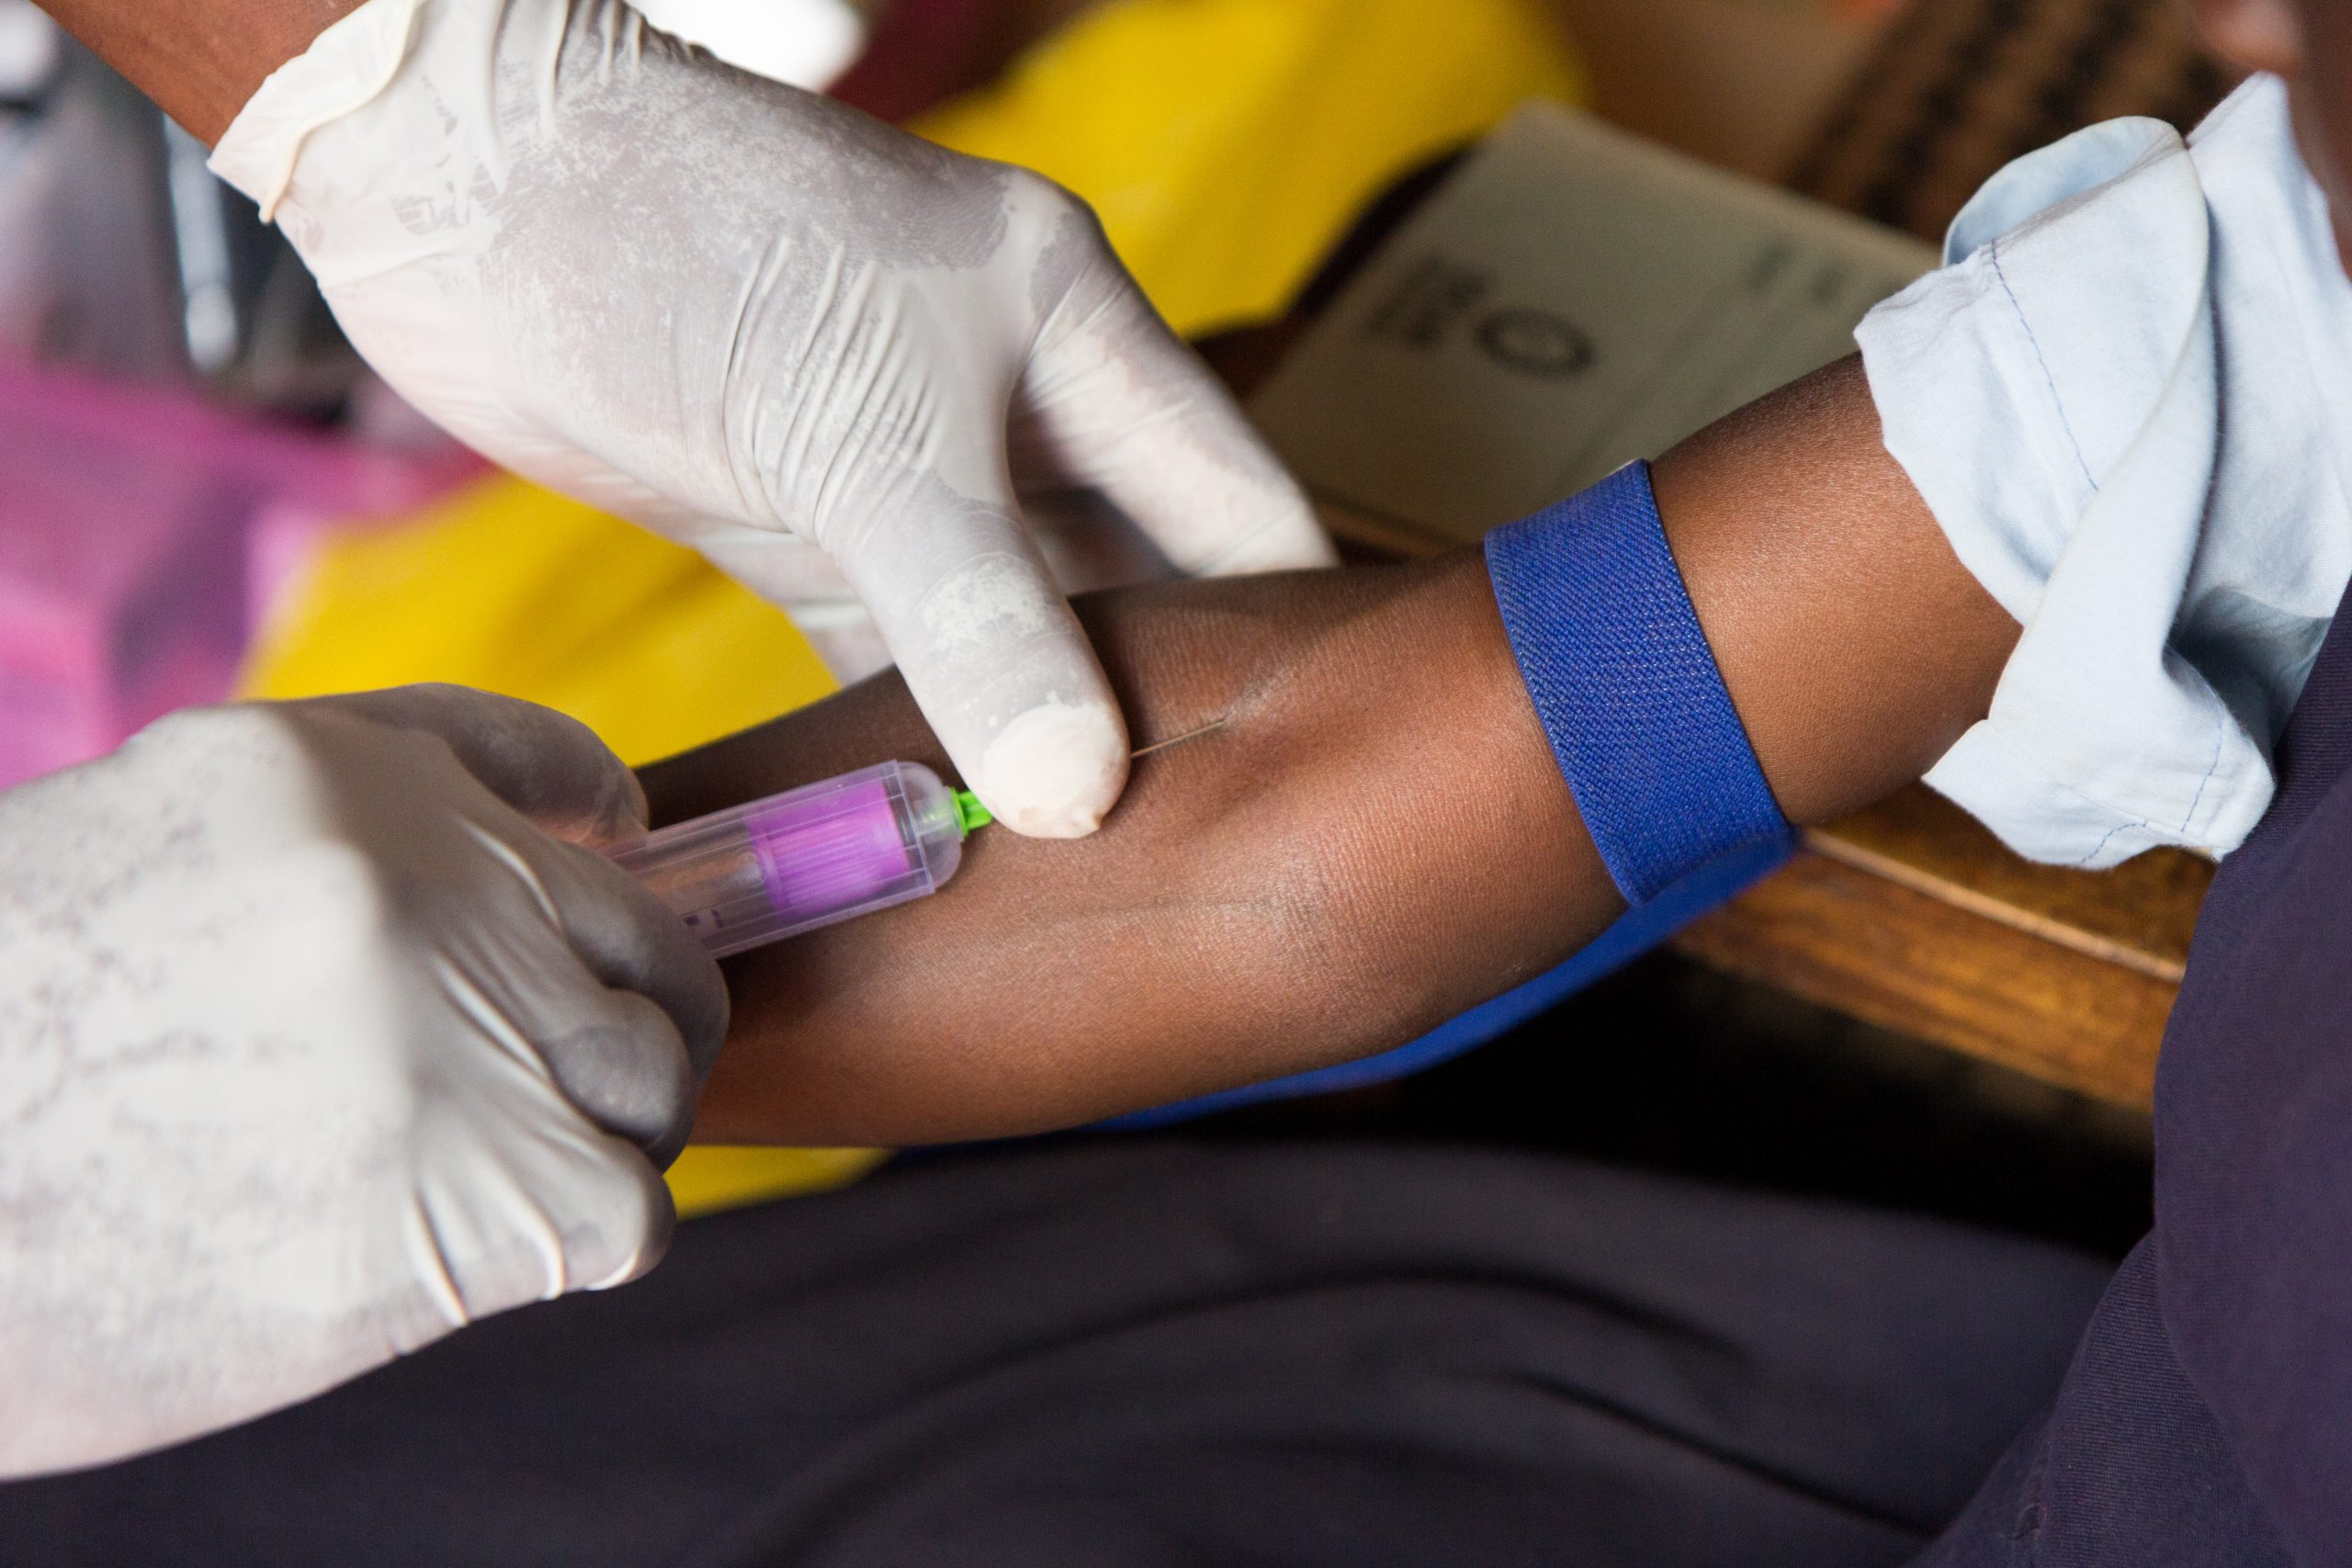 Becoming a phlebotomy technician at the Phlebotomy Career Training